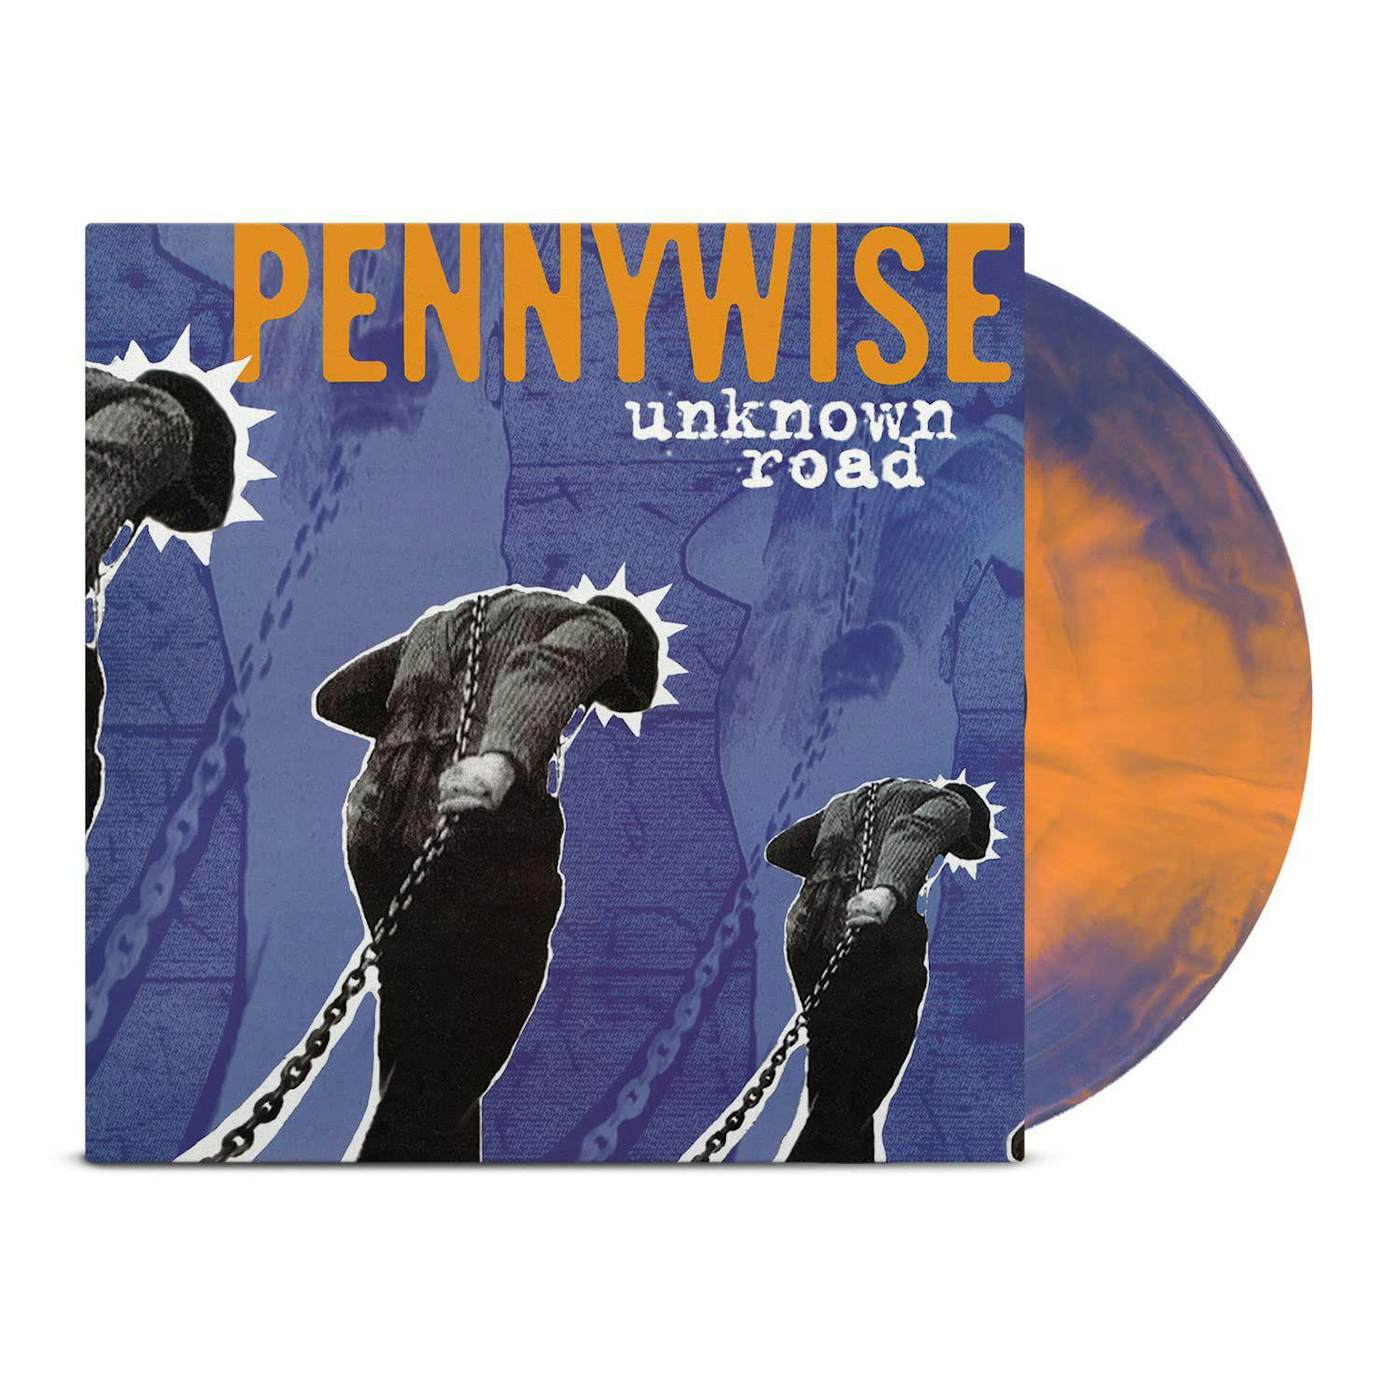 Pennywise Unknown Road (Opaque Orange) Vinyl Record